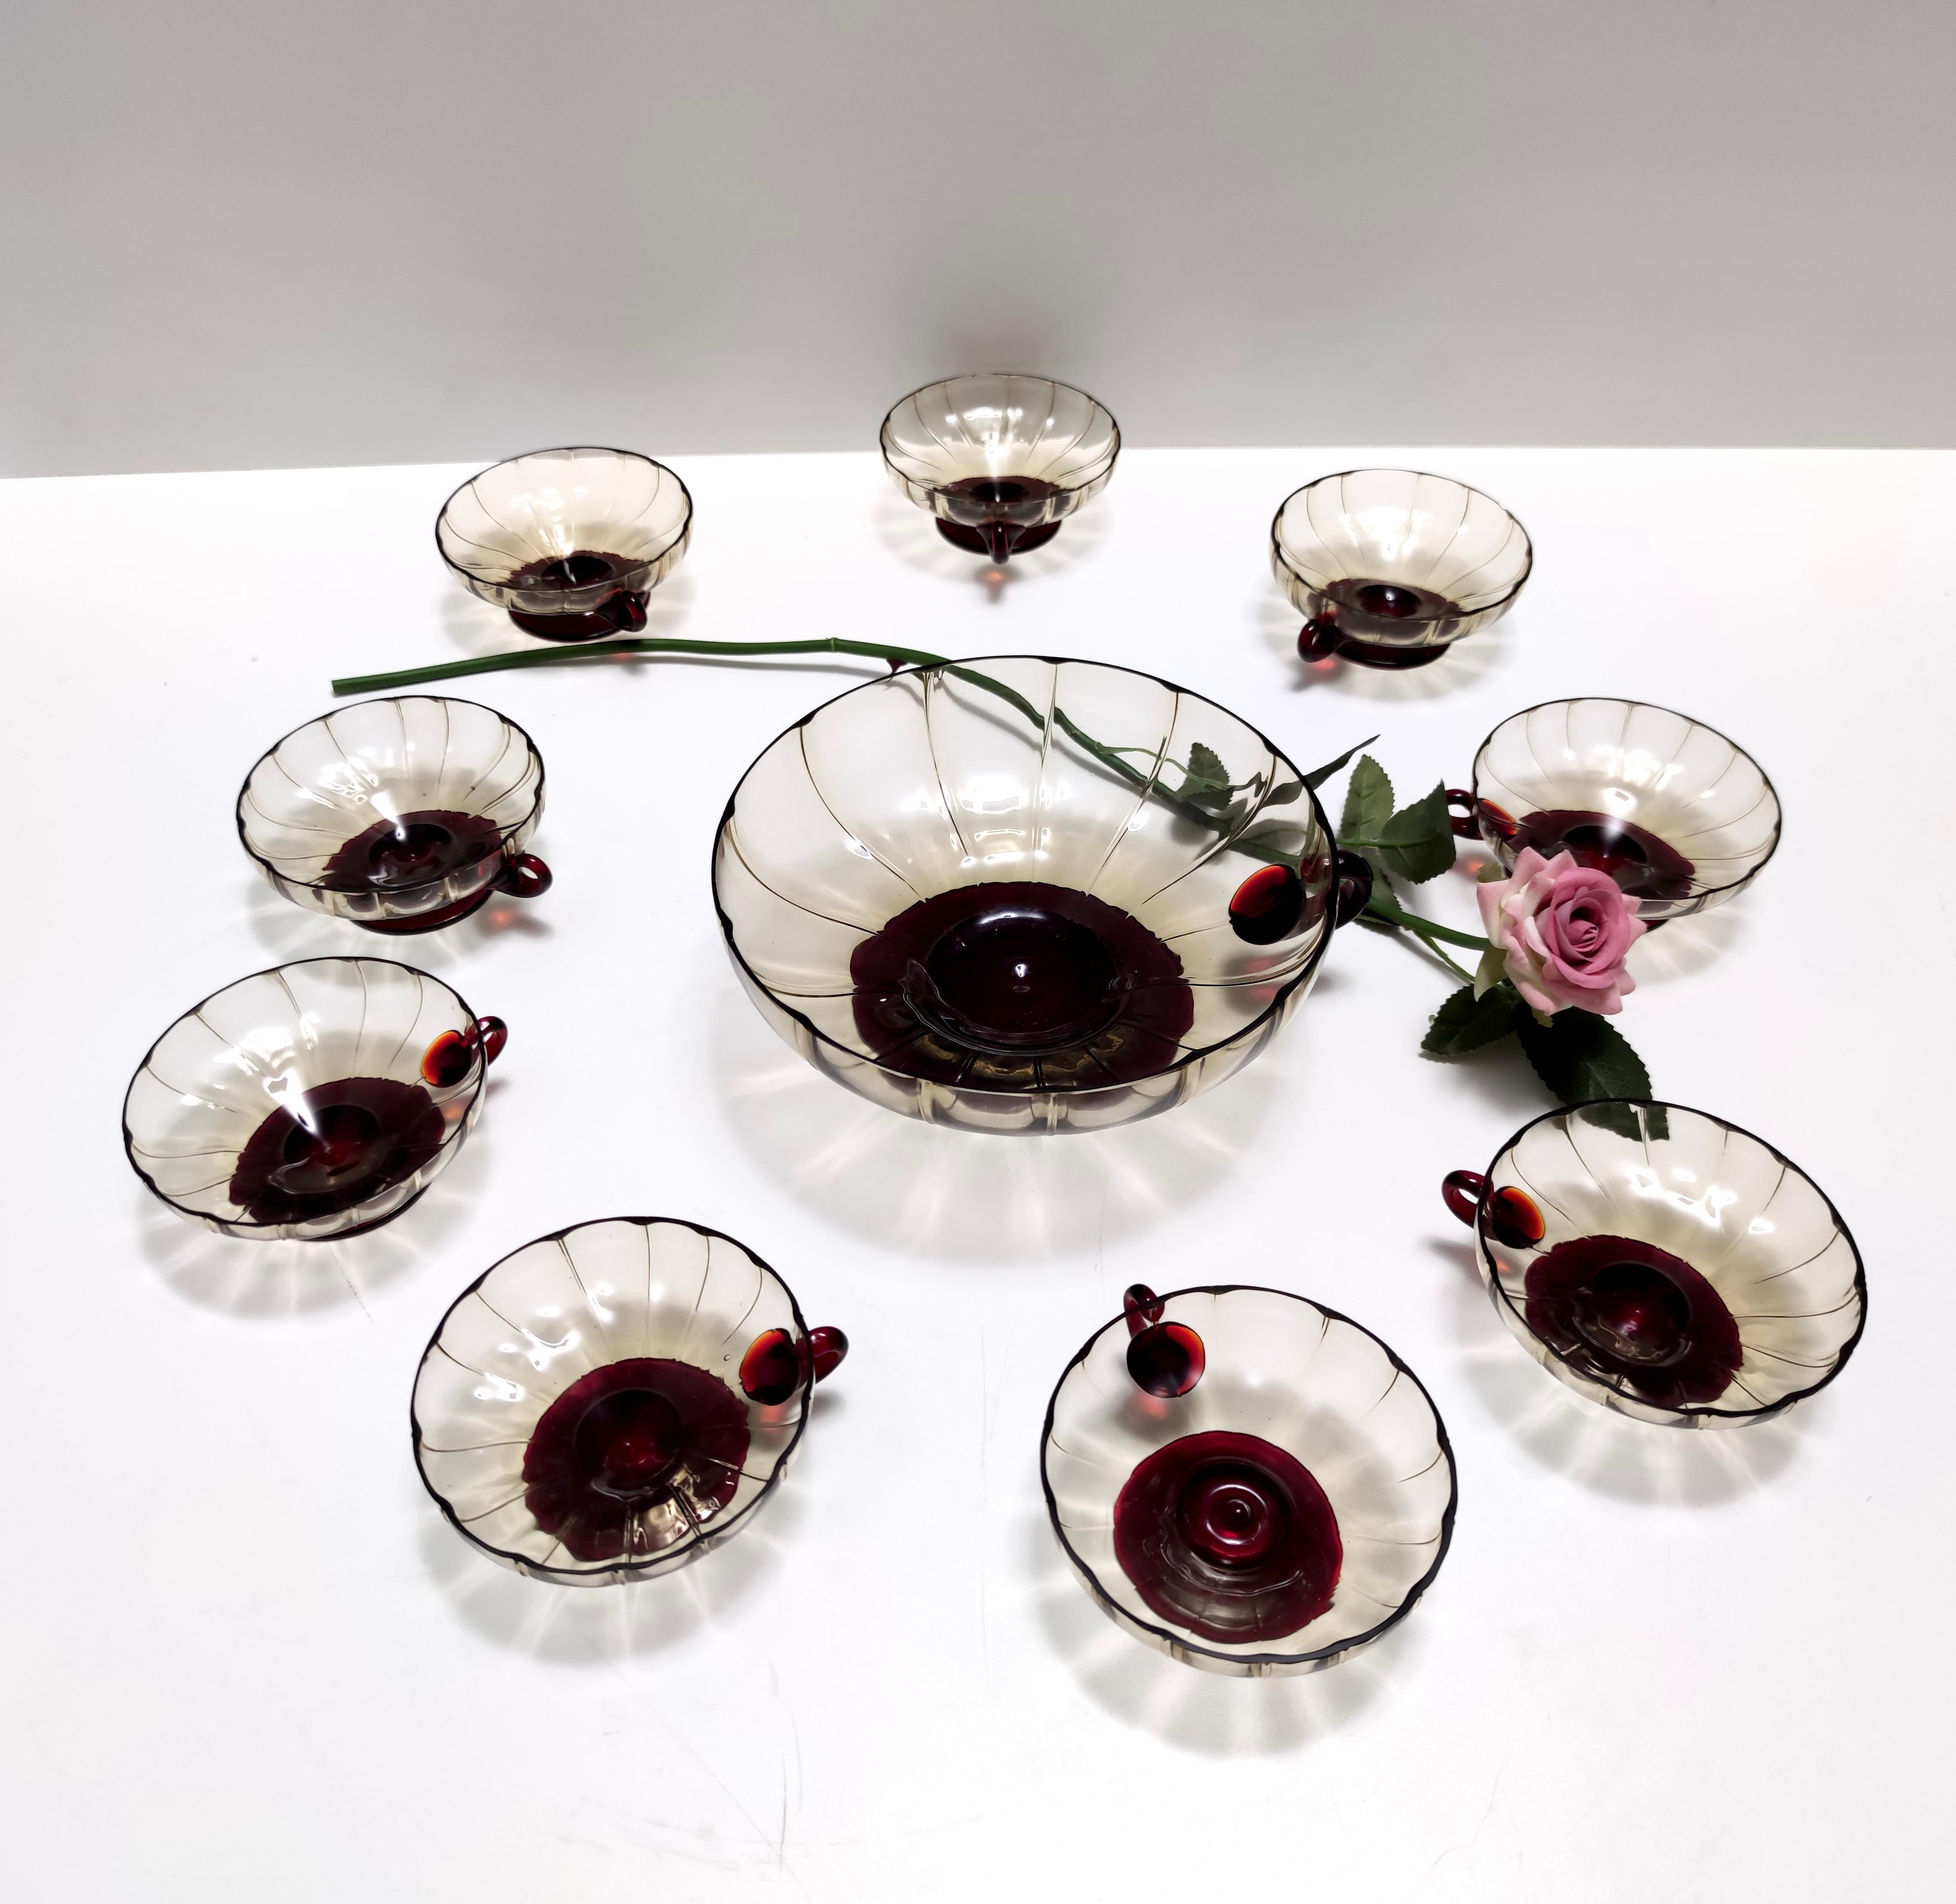 Made in Italy, 1920s - 1930s. 
This is an elegant set of serving bowls.
This set is in the style of Vittorio Zecchin for Cappellin or Venini. 
Its color is particular as its a straw-colored smoked glass with crimson details. 
This is a vintage set,